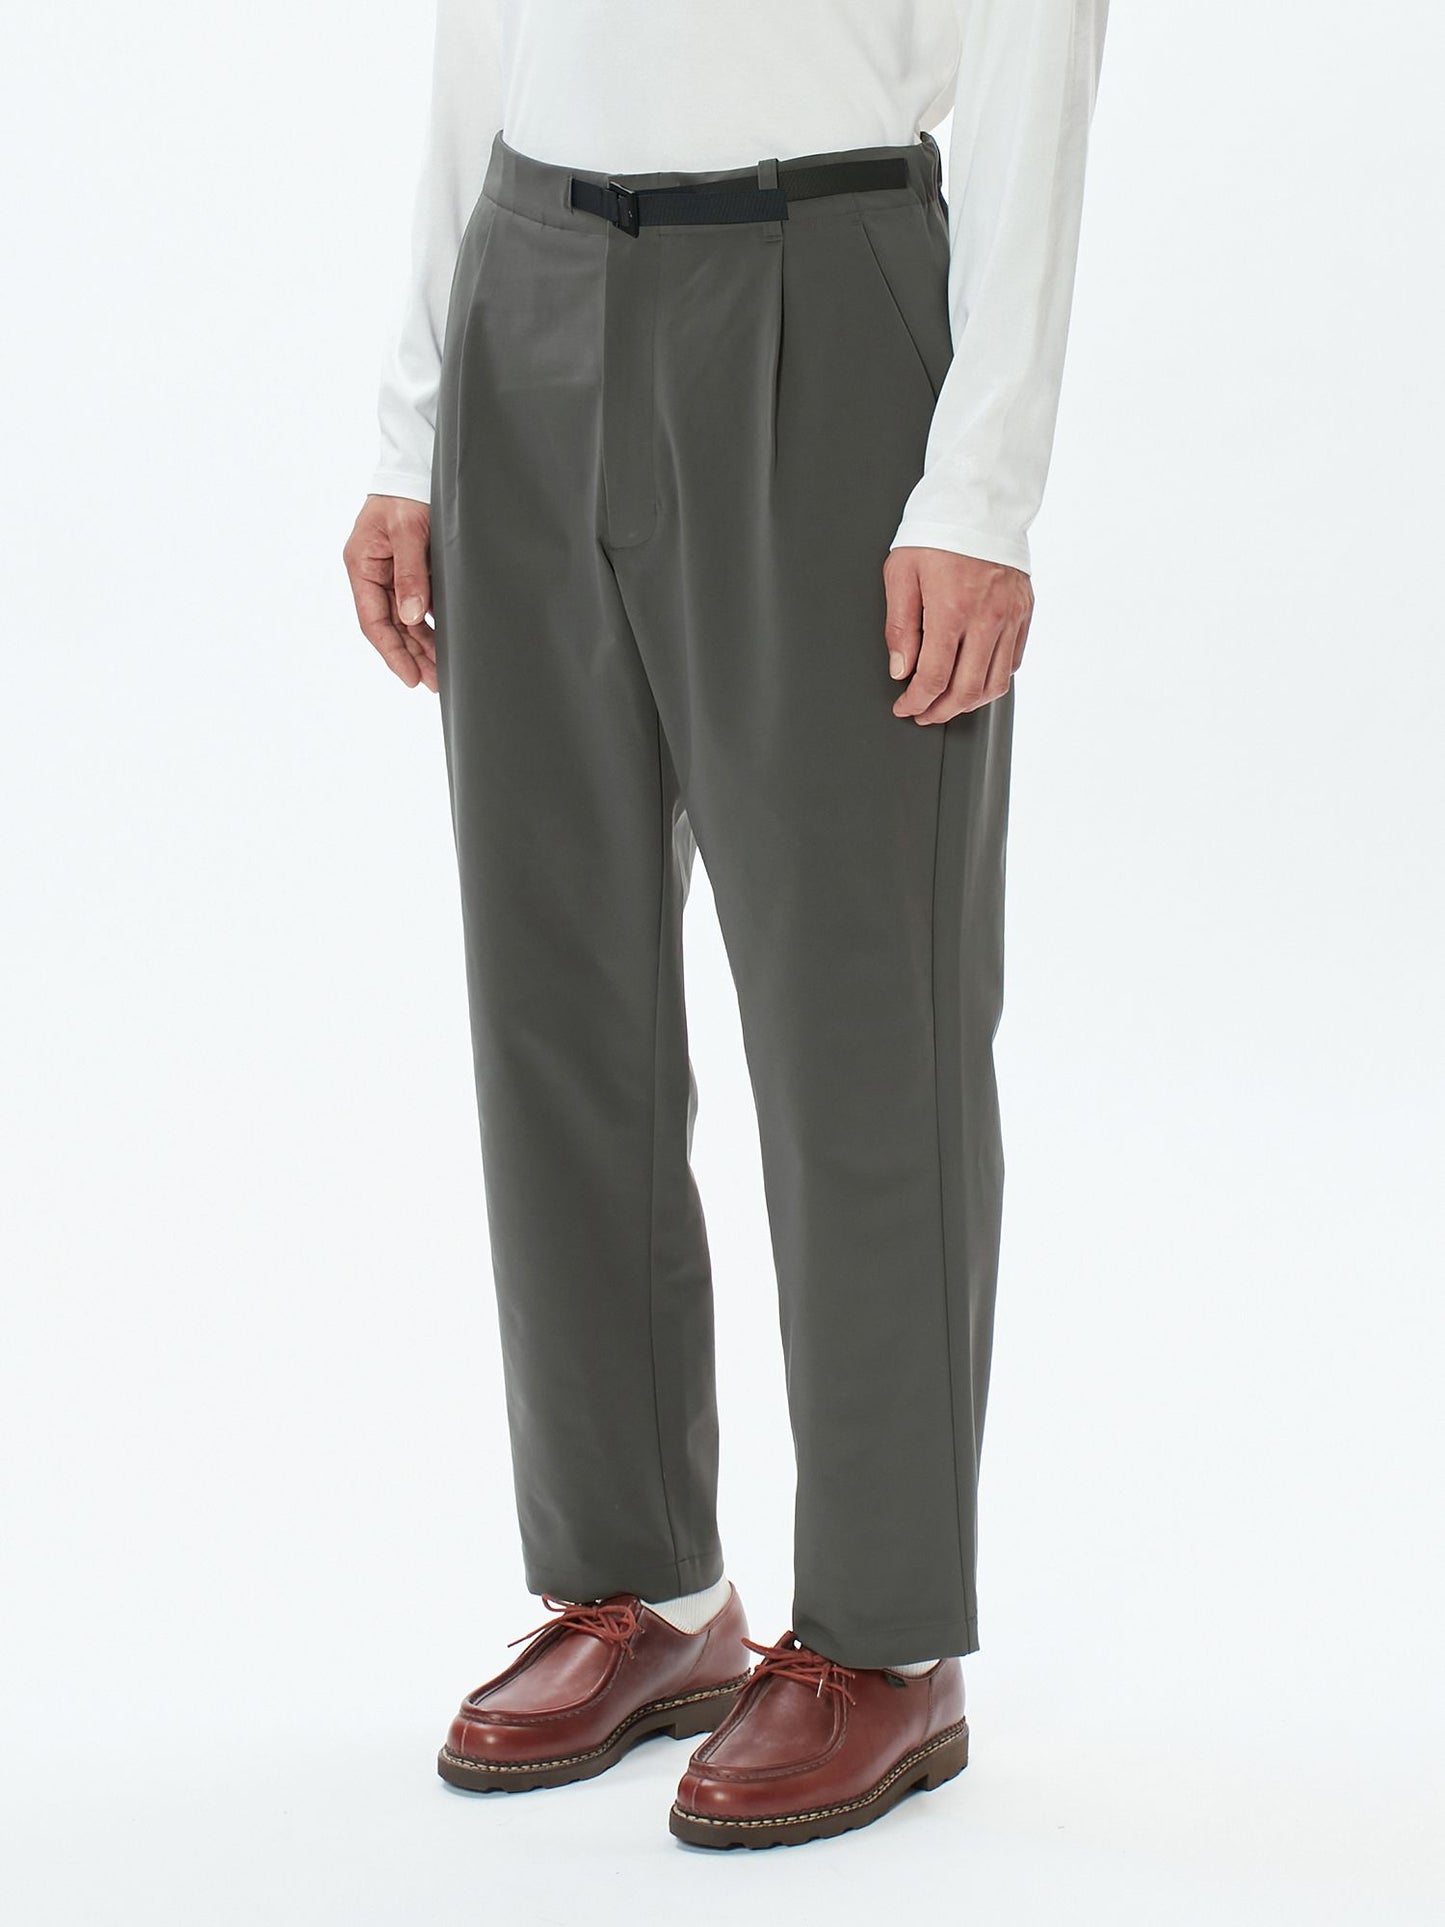 GOLDWIN(ゴールドウイン) One Tuck Tapered Stretch Pants GL74198